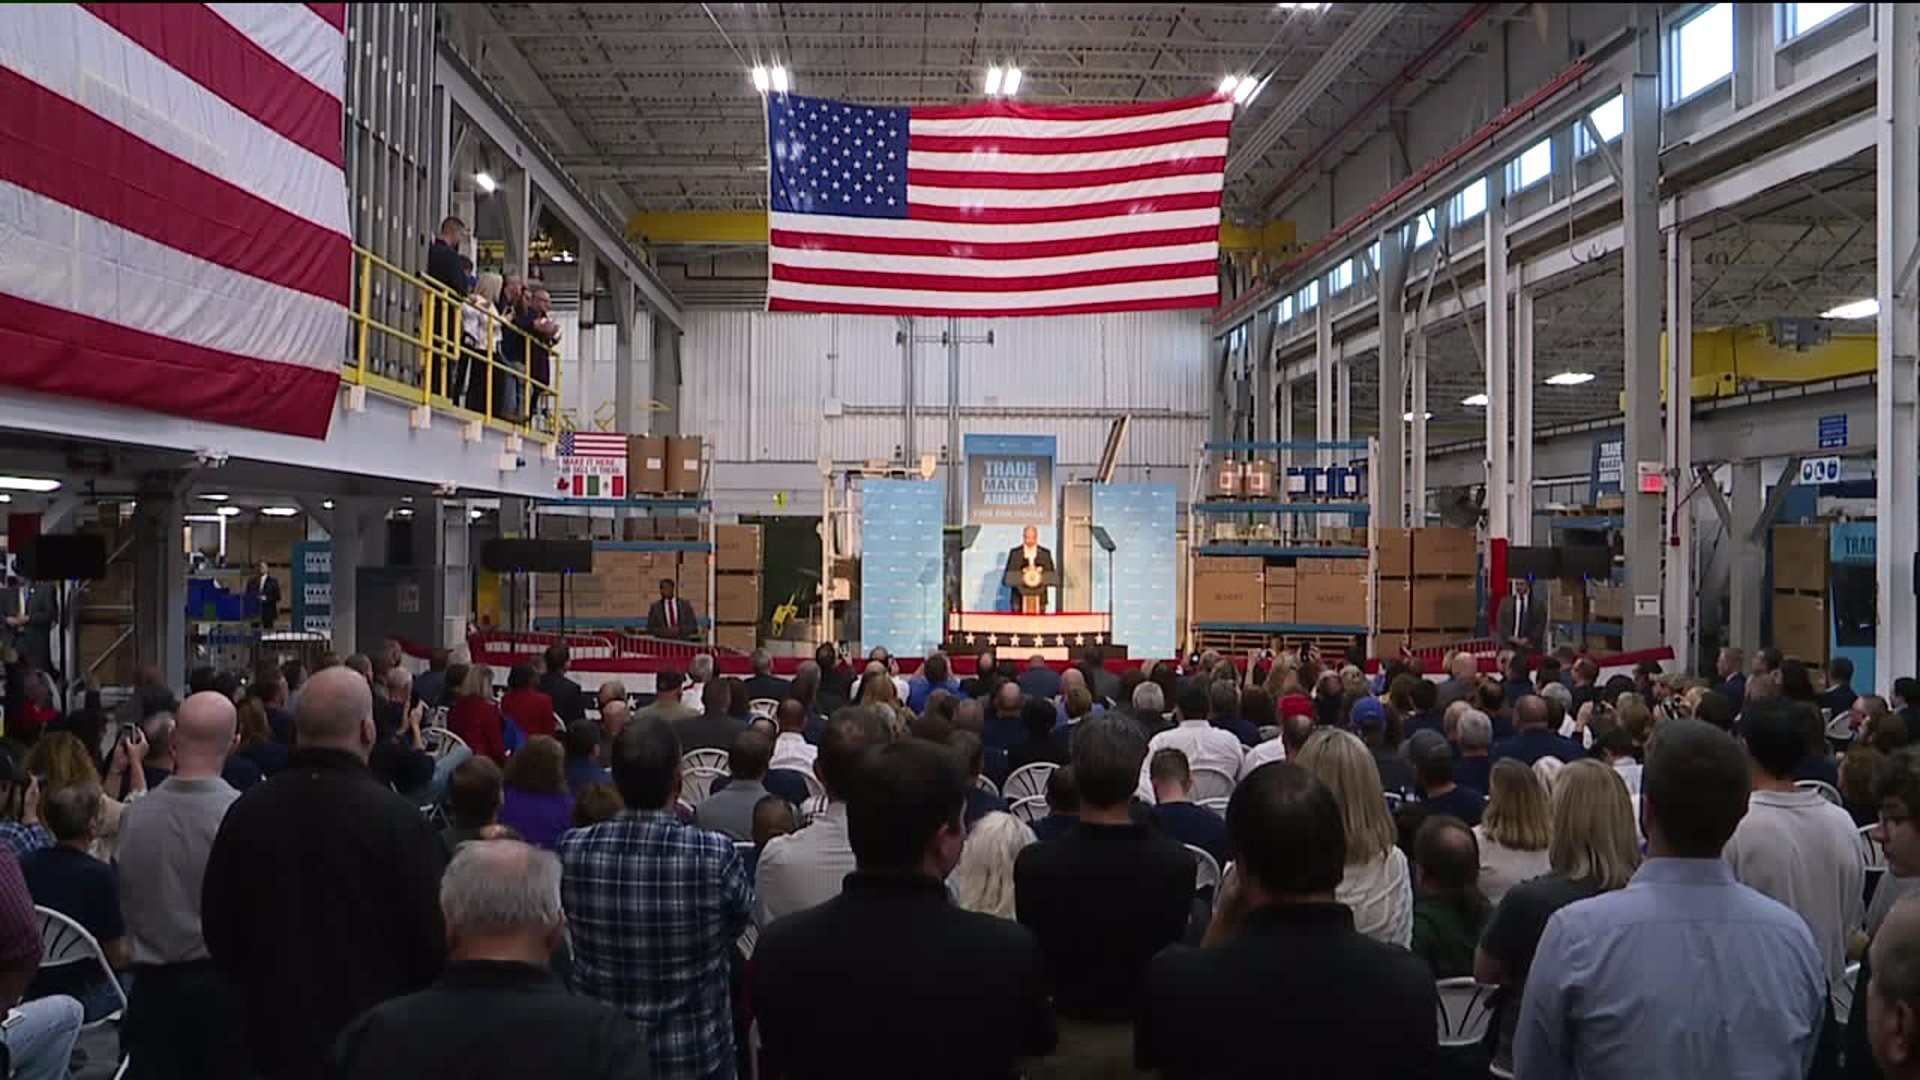 Employees at Two Plants get to Listen to Vice President Rally for Trump Administration`s New Trade Deal